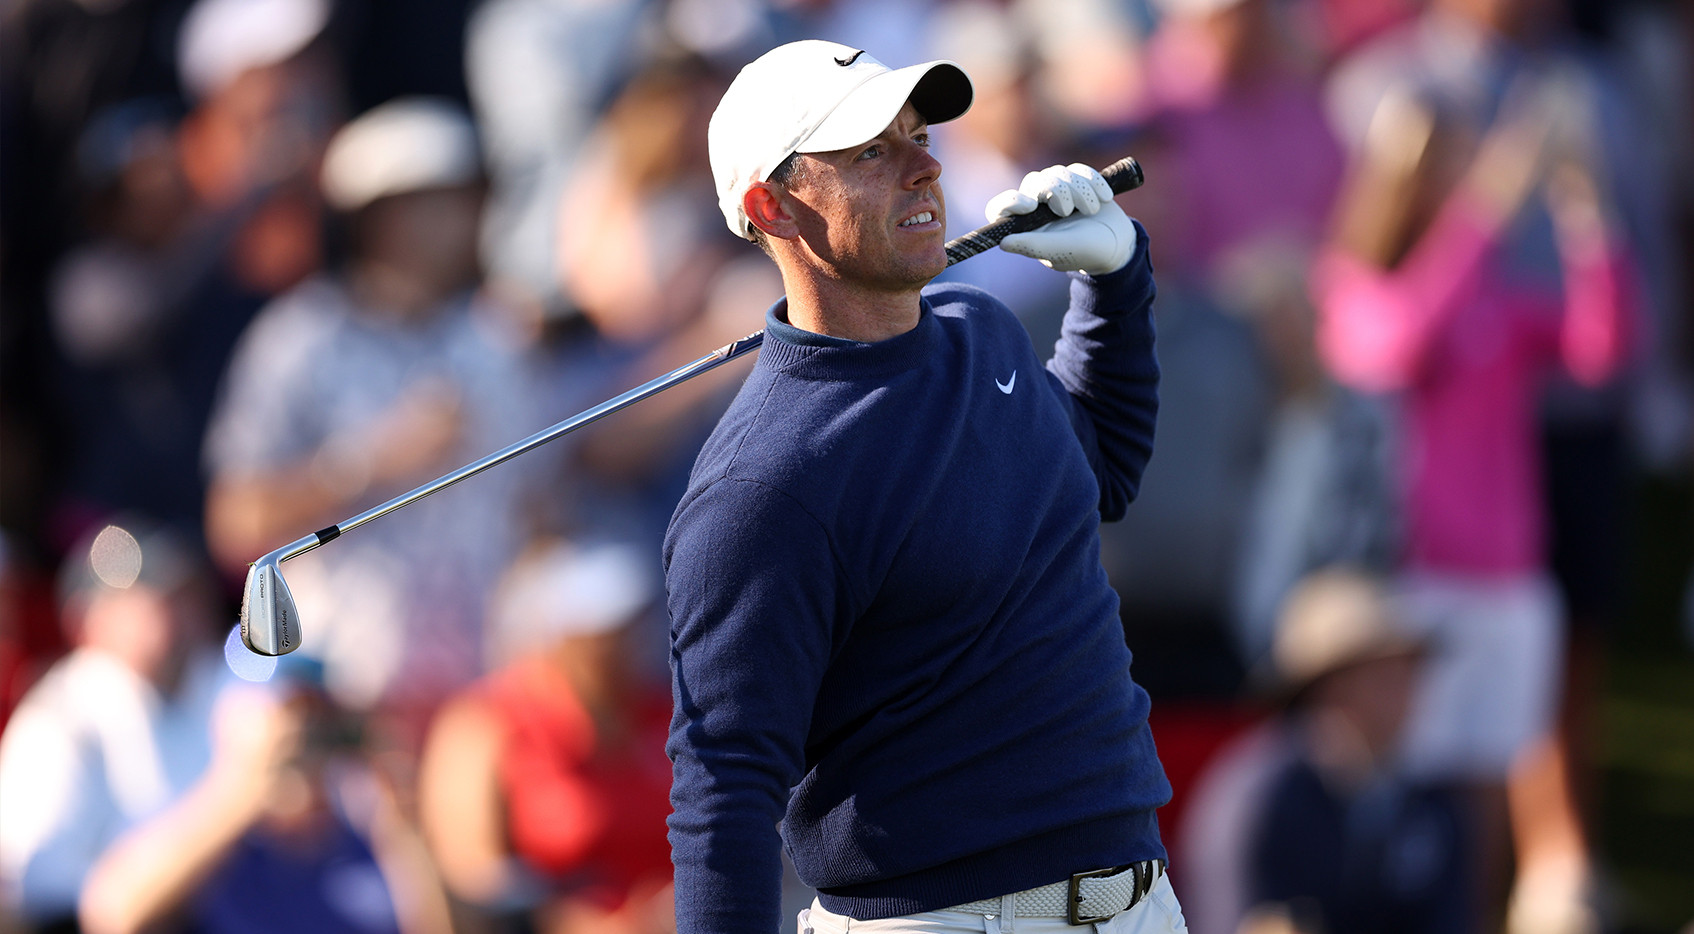 McIlroy vows to shift focus away from politics